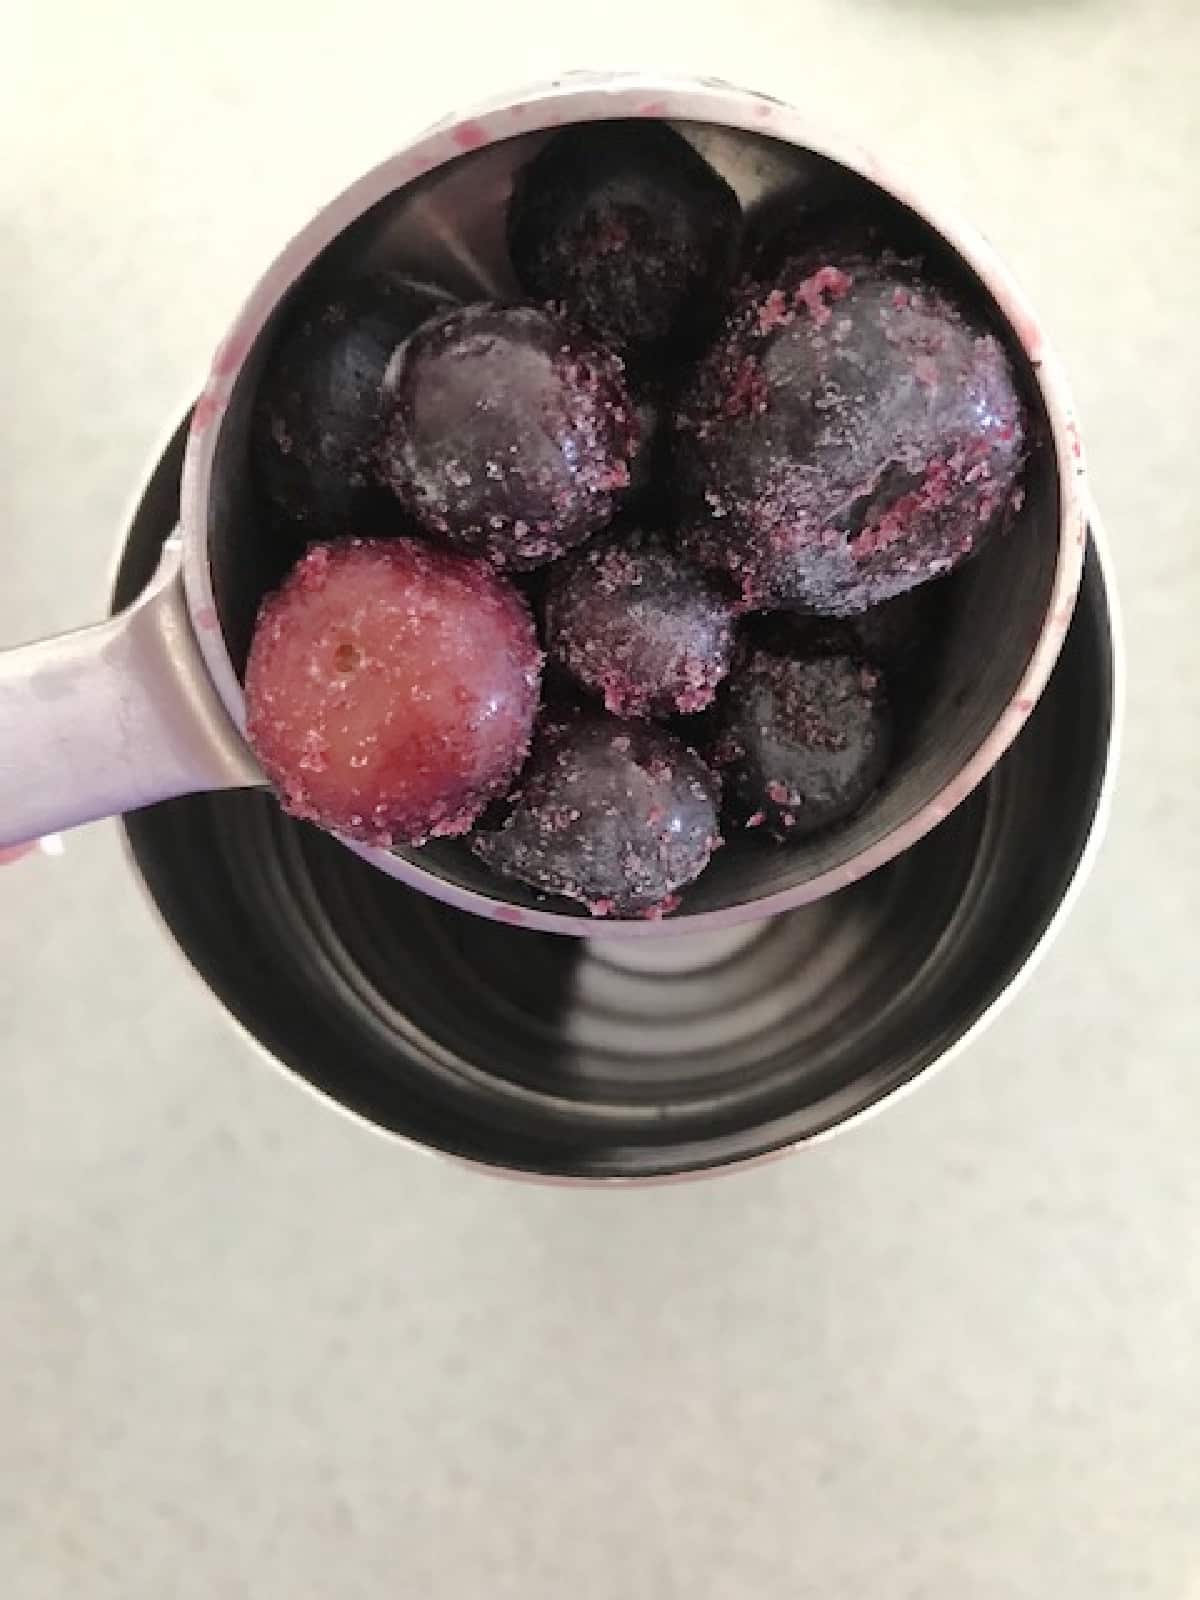 Blueberries in a measuring cup over a cocktail shaker for a blueberry margarita recipe.